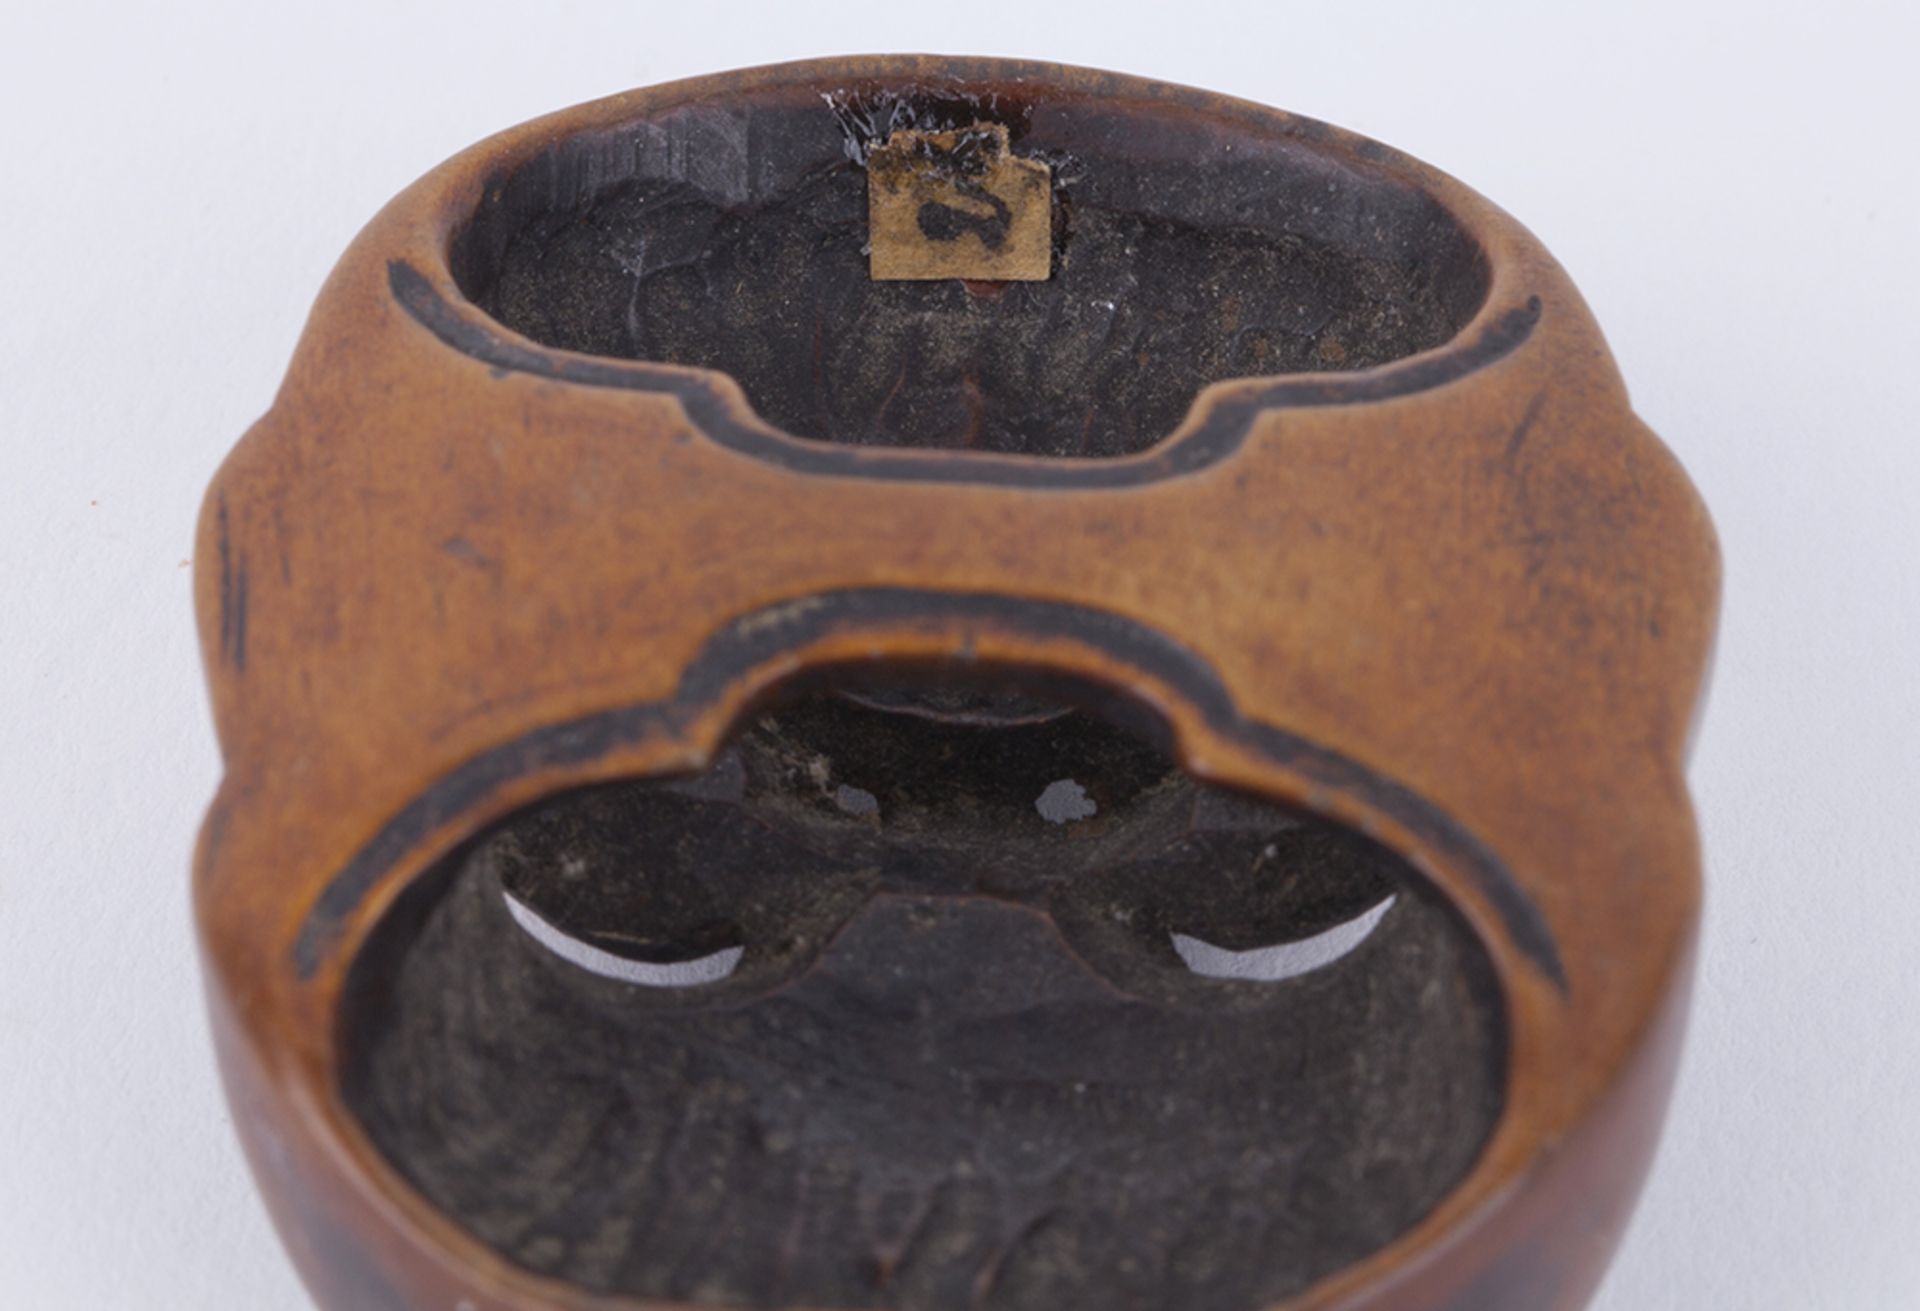 ANTIQUE JAPANESE MINIATURE CARVED WOODEN MASK NETSUKE SIGNED 19TH C. - Image 6 of 7